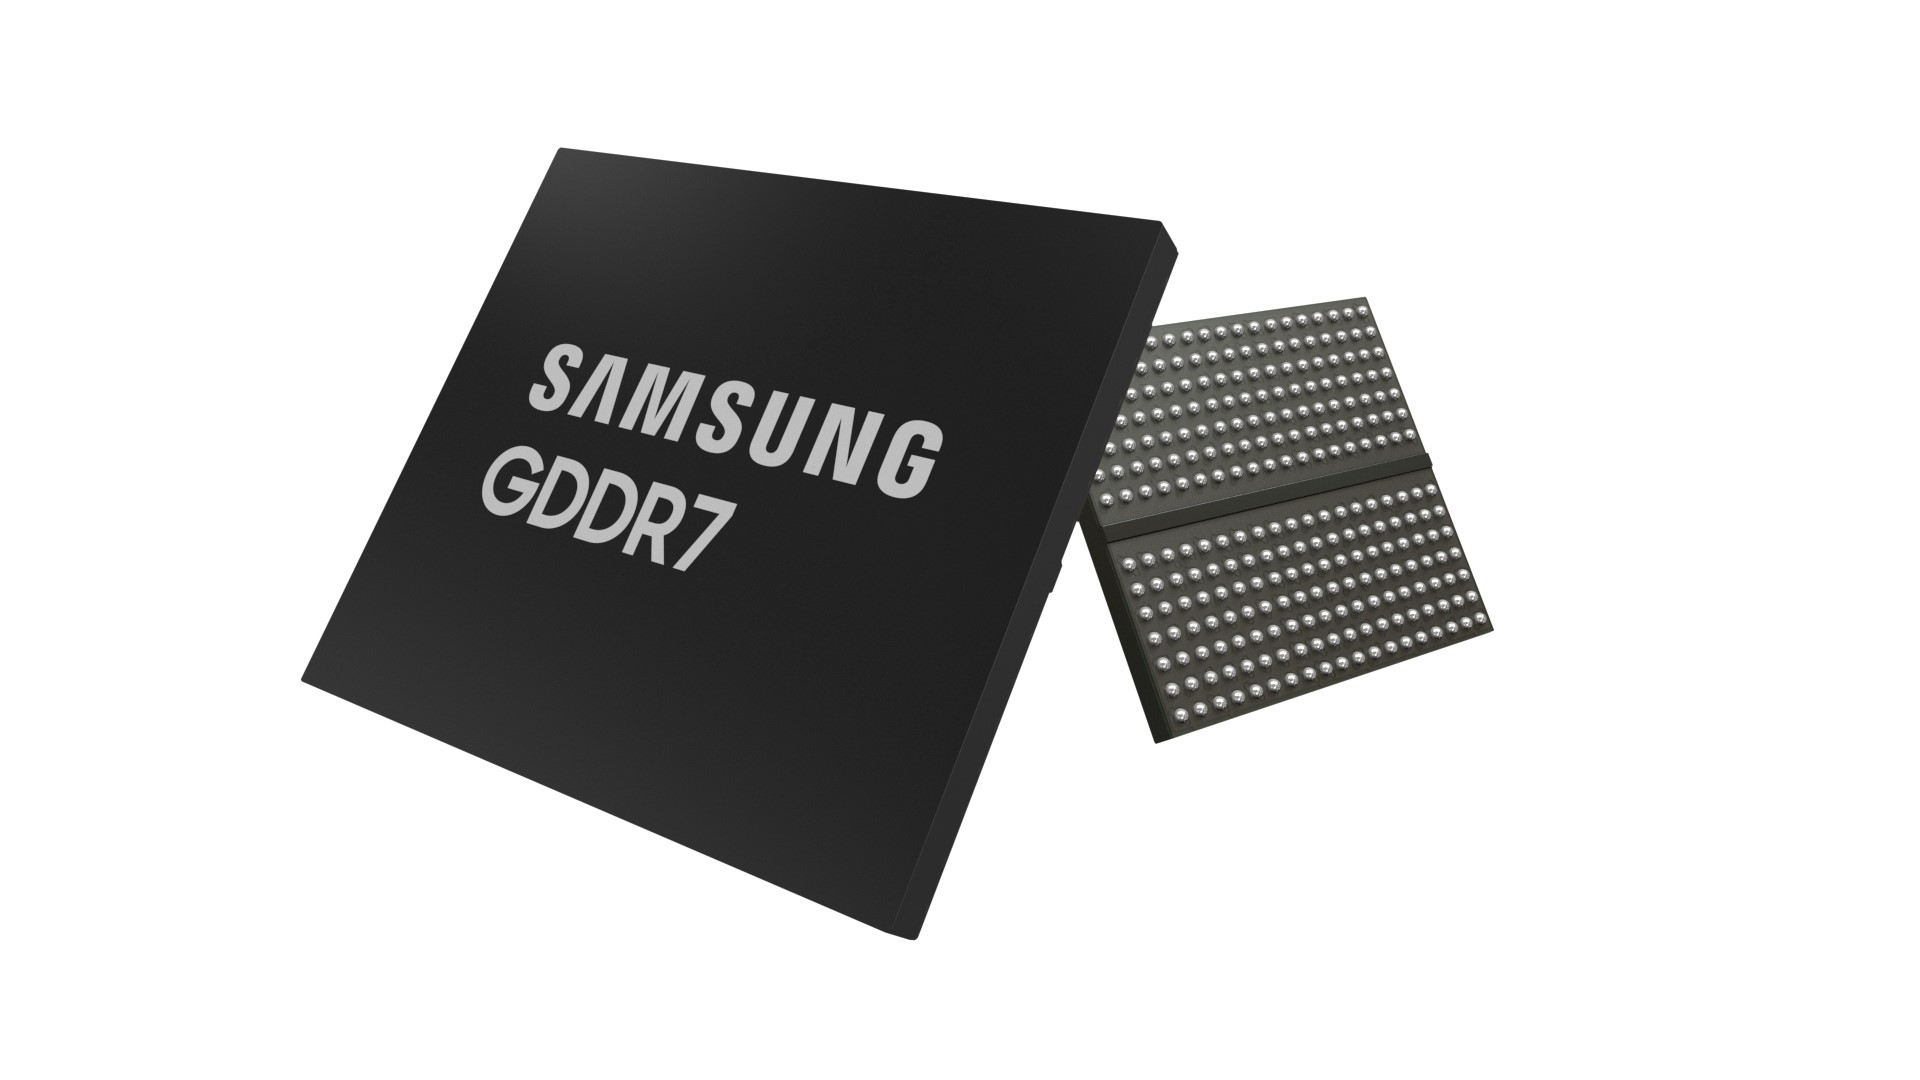 Samsung Crosses The Line First On GDDR7 Release, Rated At 32Gbps 35